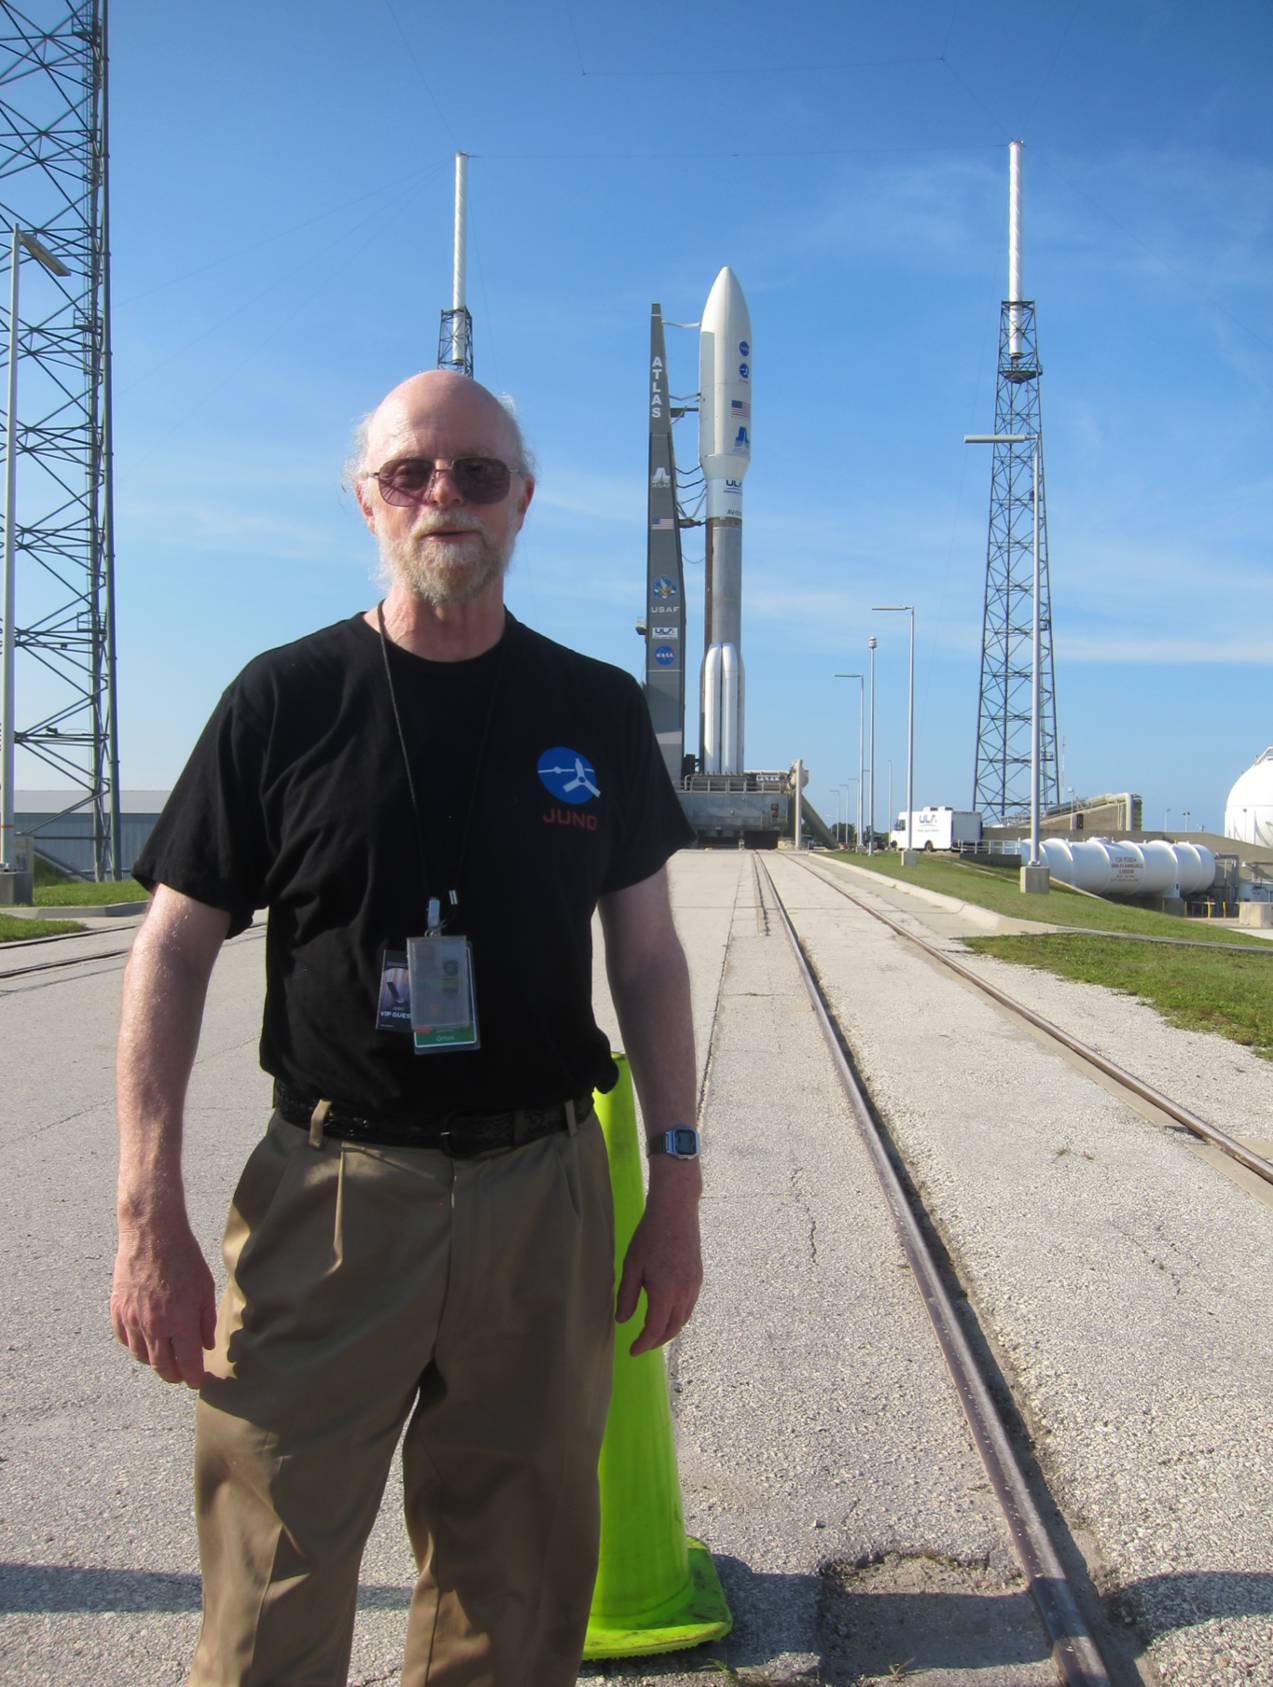 Photo of a man standing on a launchpad with a shuttle in the background